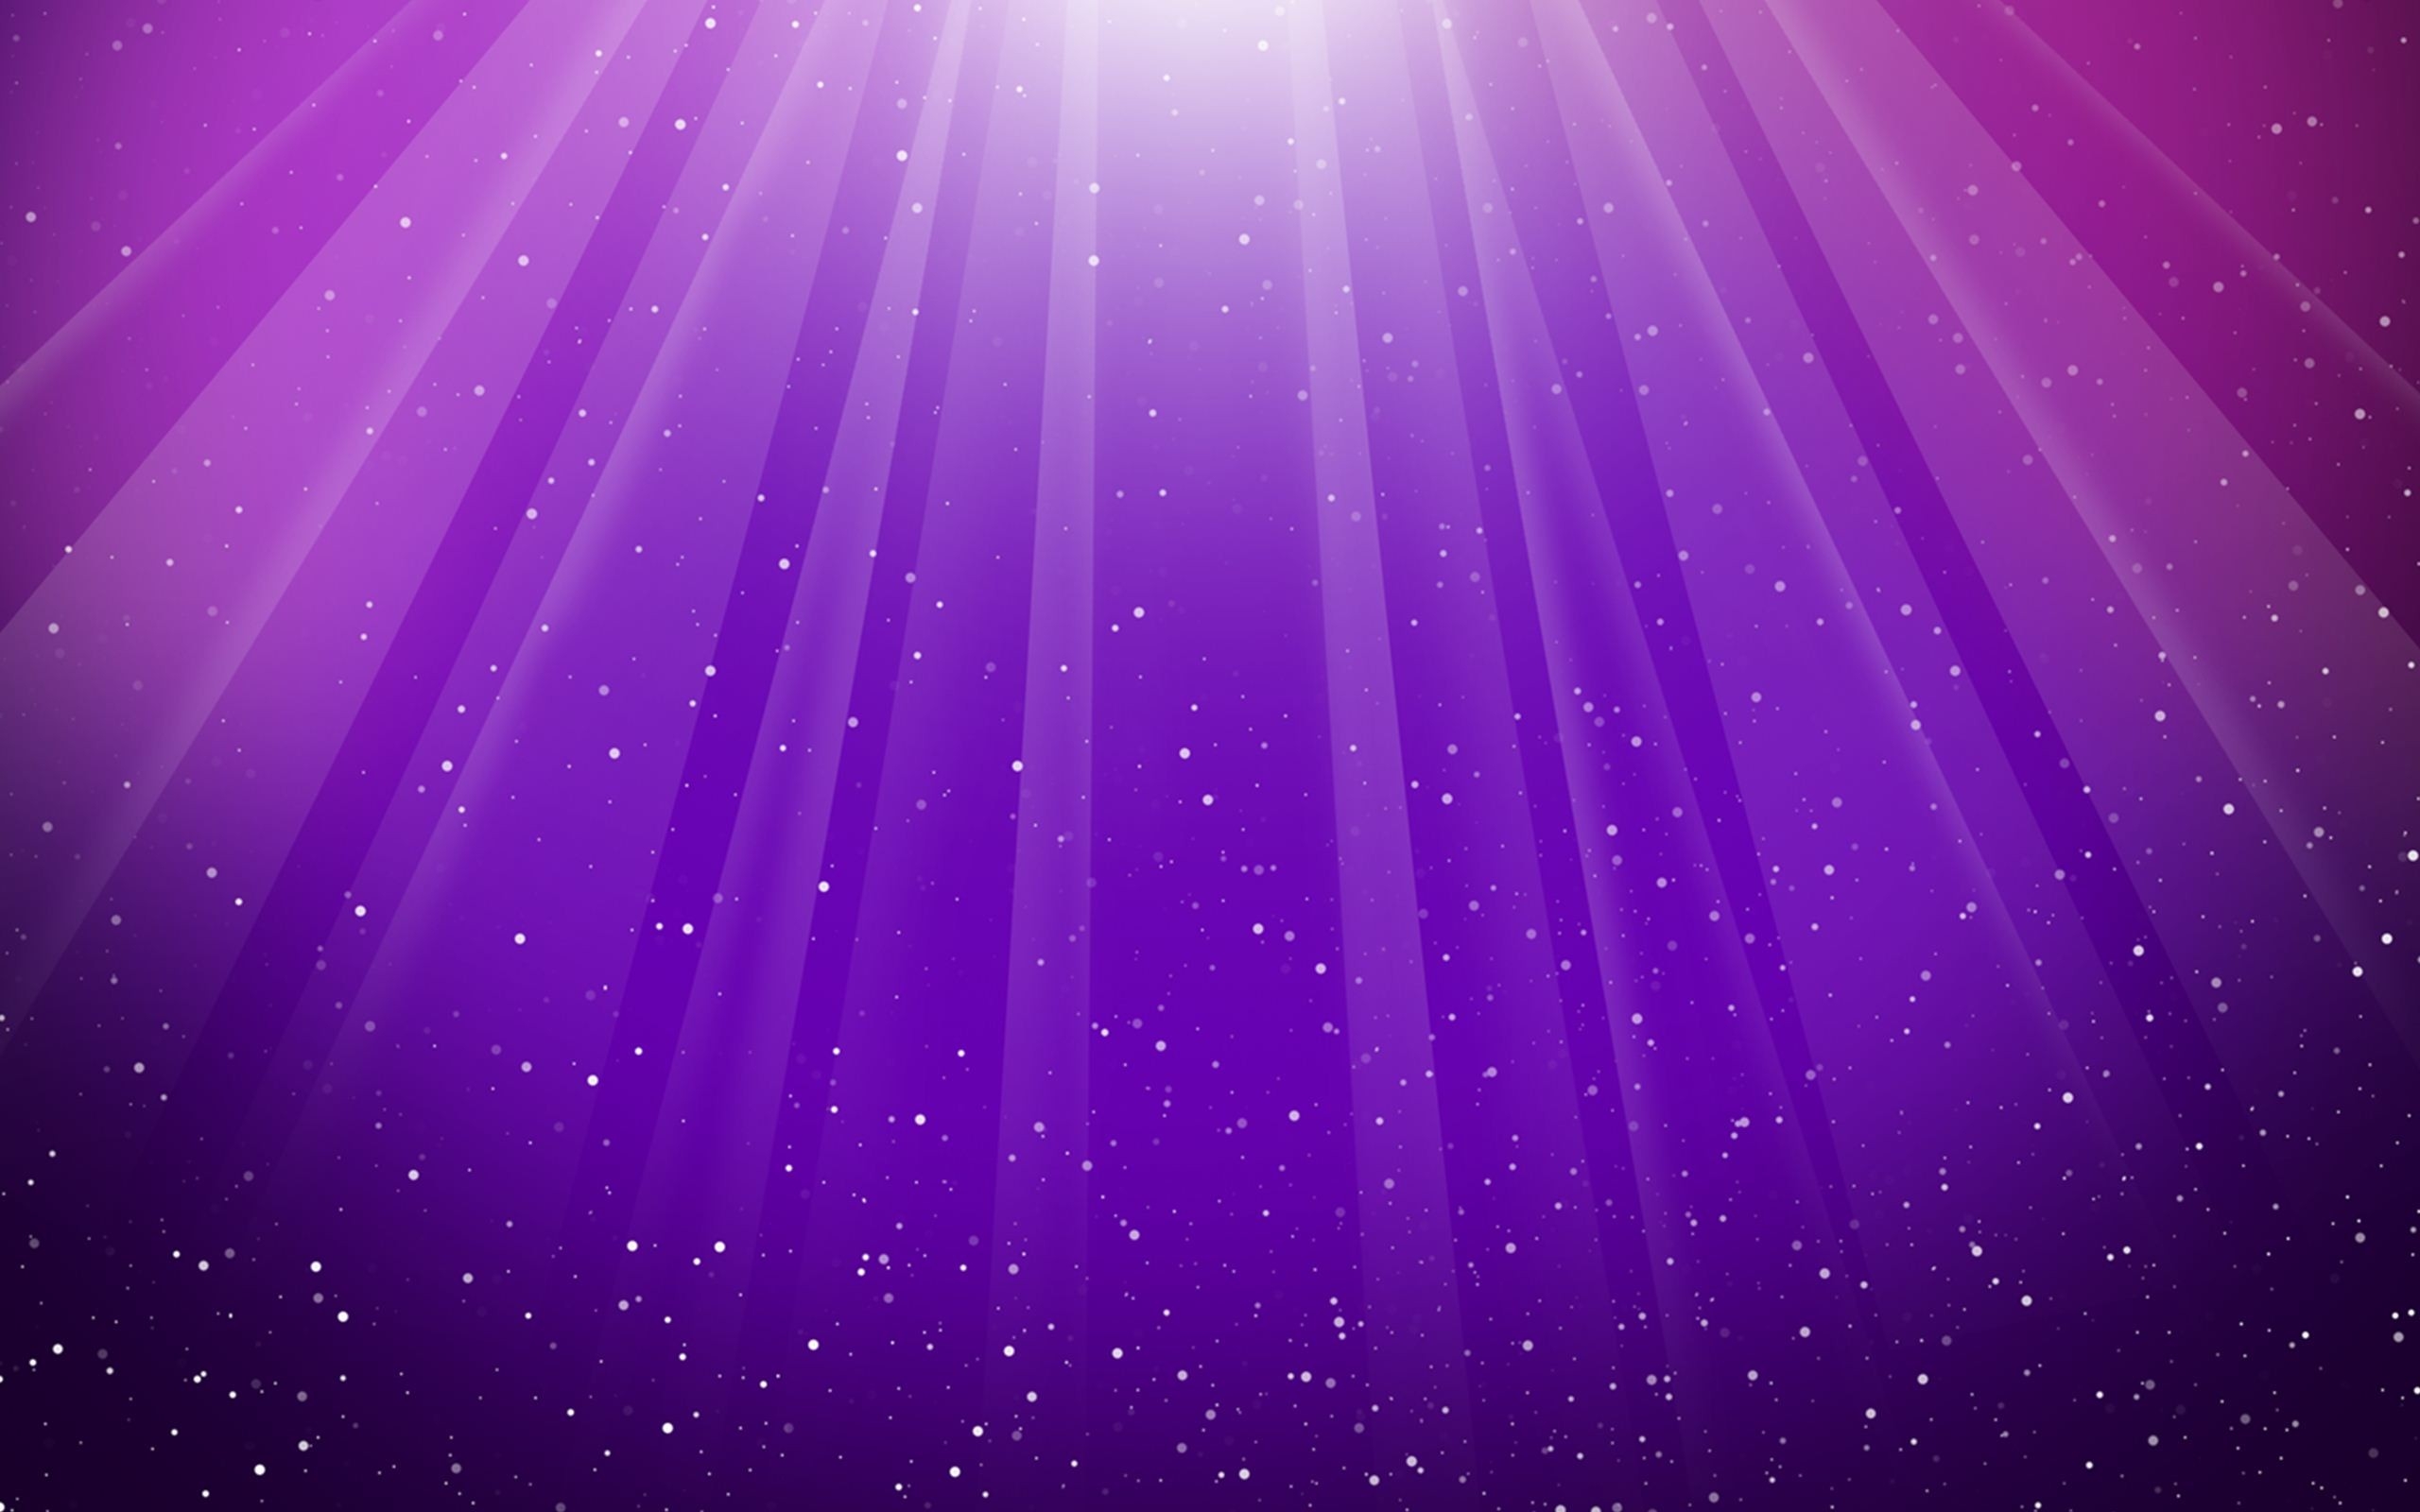 Rays of light with sparkles on a pink and purple background